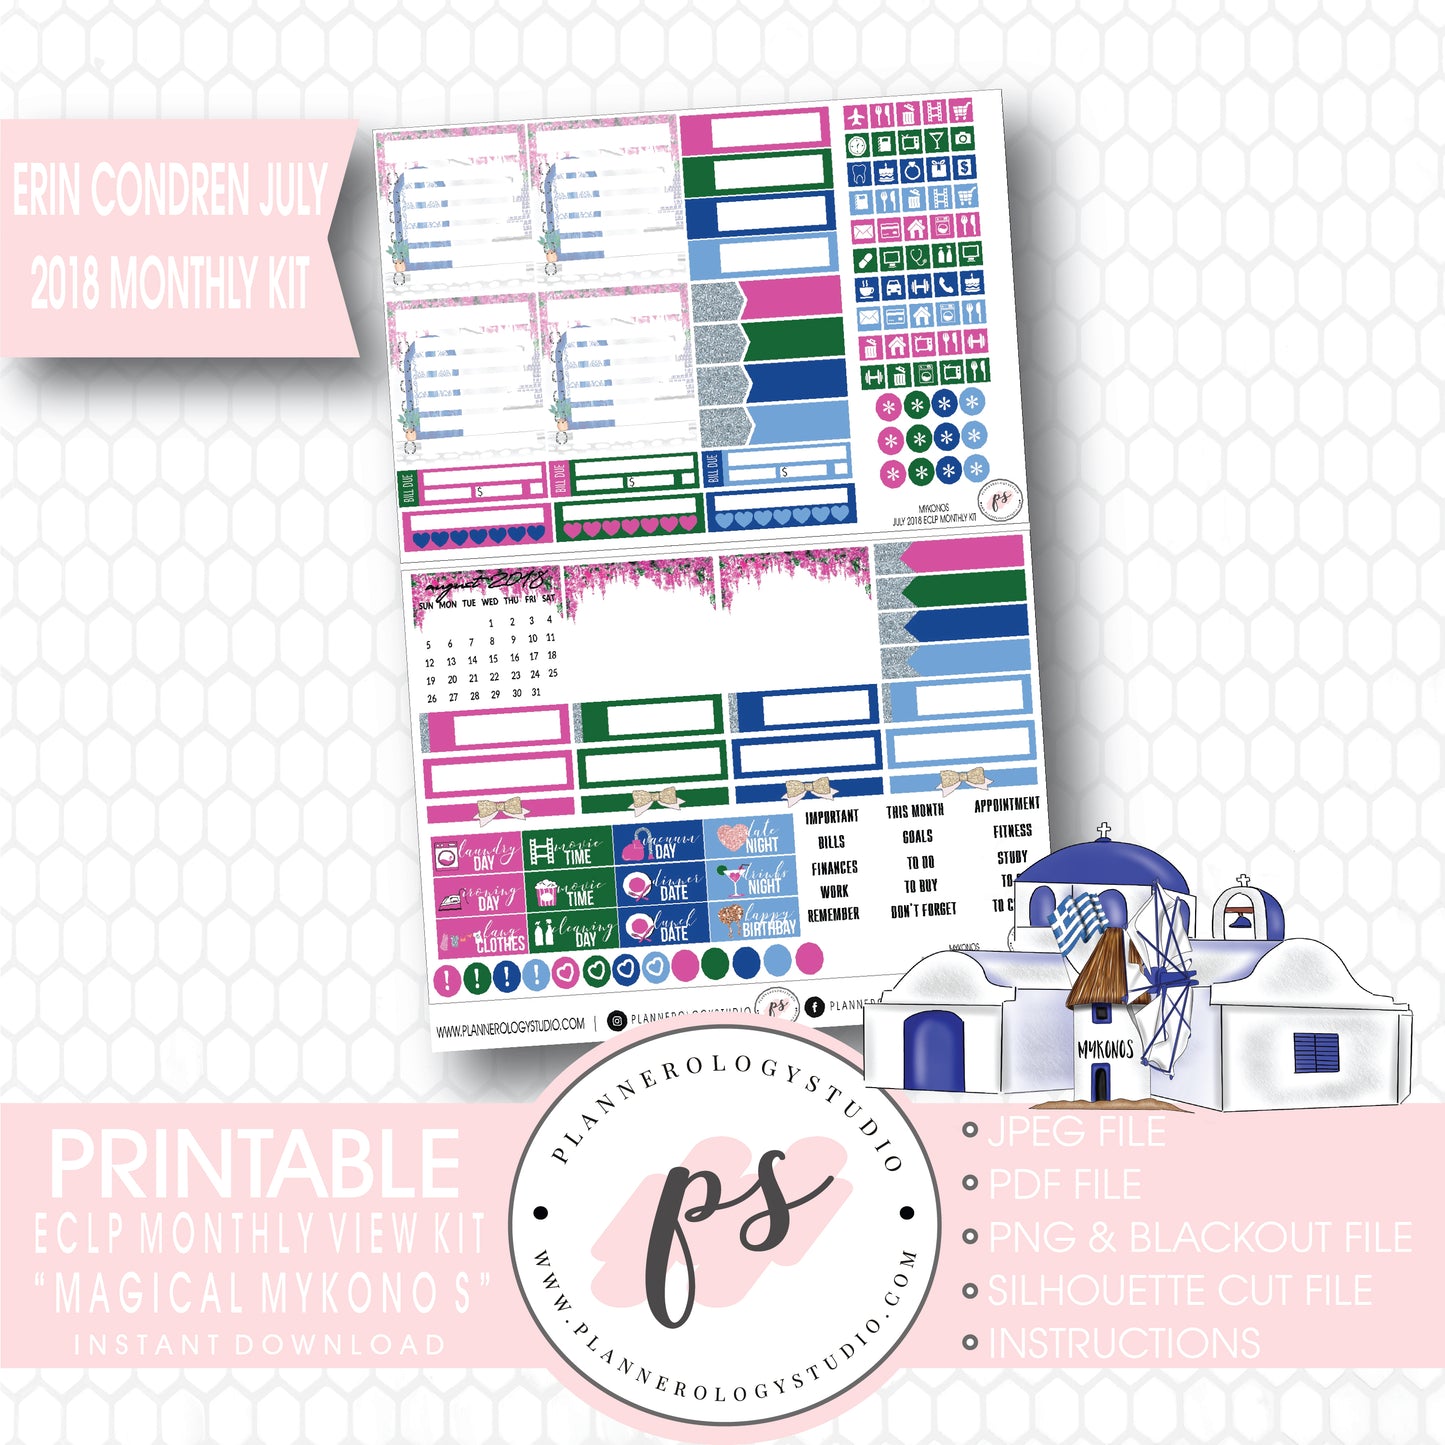 Magical Mykonos July 2018 Monthly View Kit Digital Printable Planner Stickers (for use with Erin Condren) - Plannerologystudio